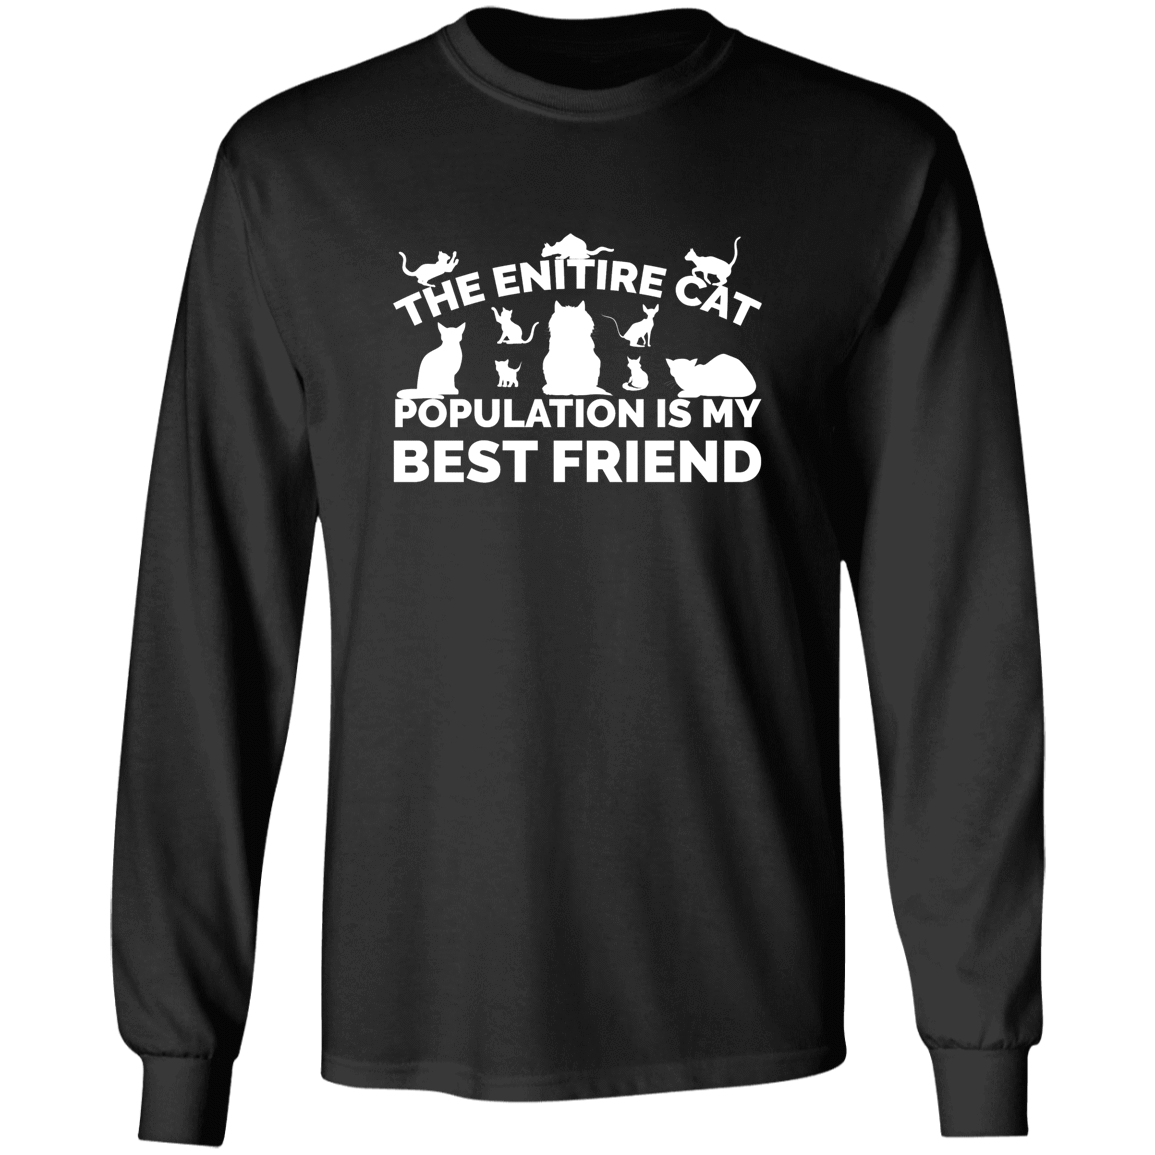 The Entire Cat Population - Long Sleeve T Shirt.